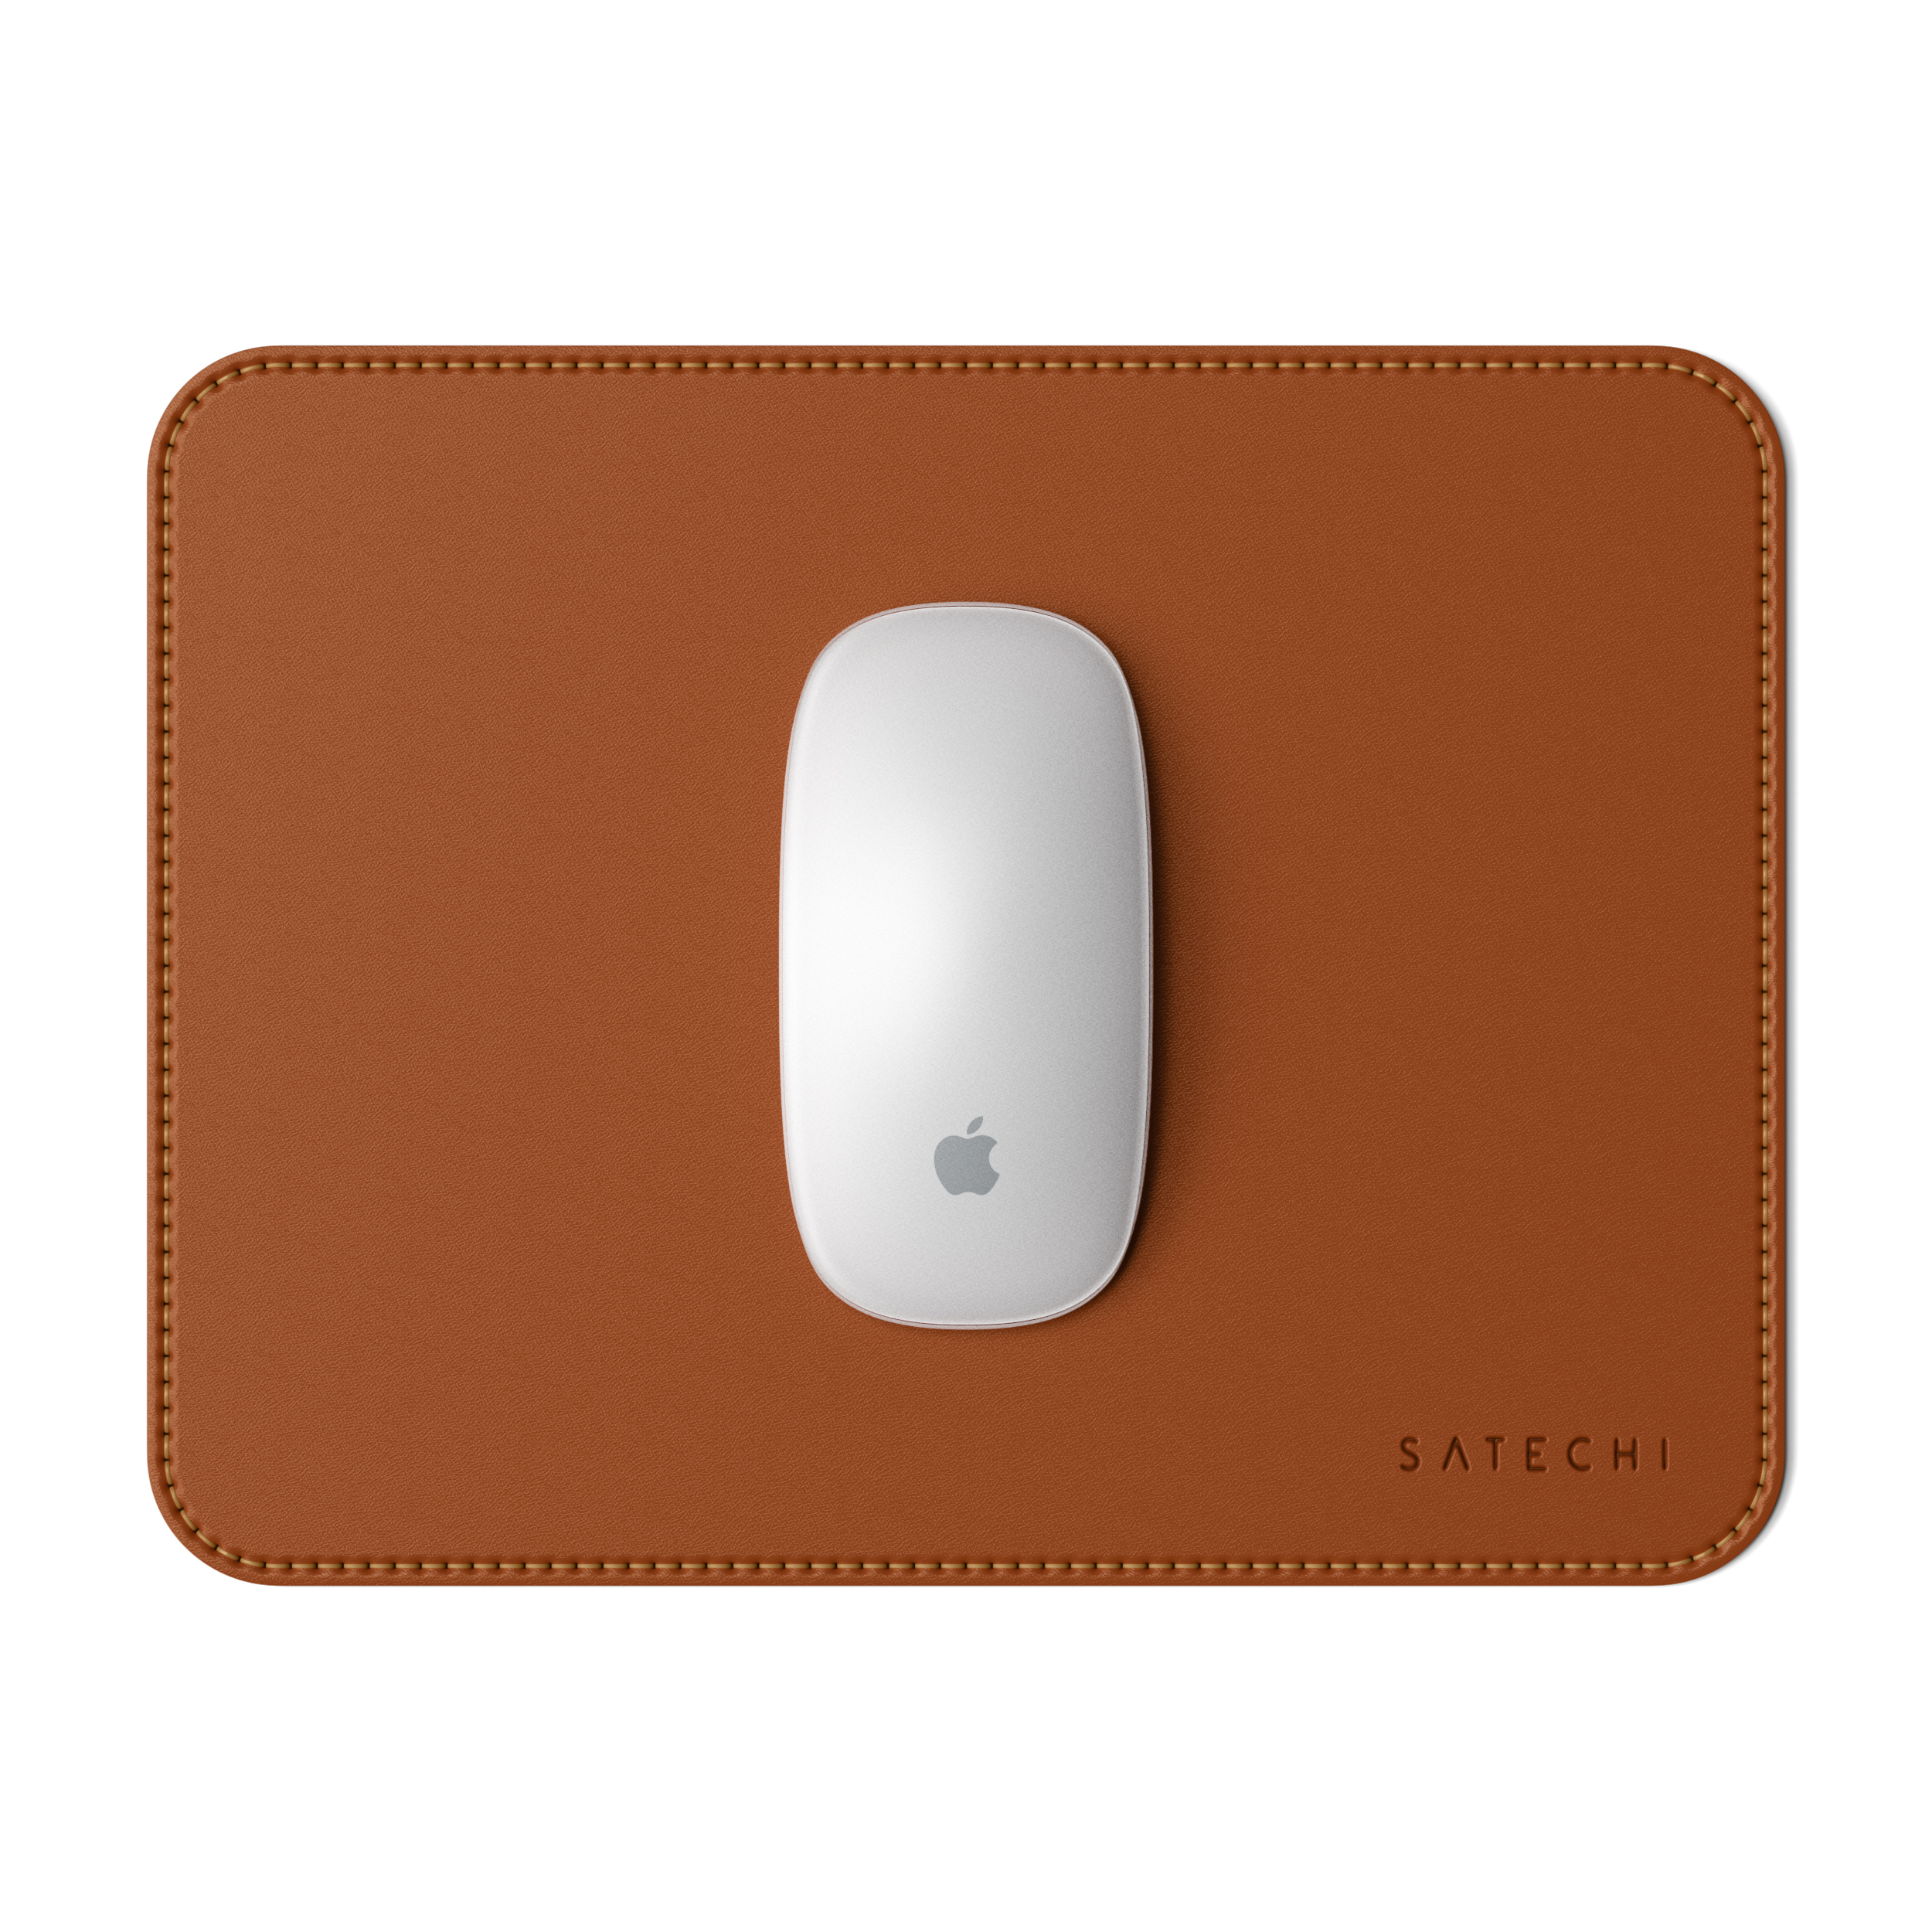 SATECHI Eco-Leather Mouse Pad - Brown 24,89 Mousepad cm) cm (19 x